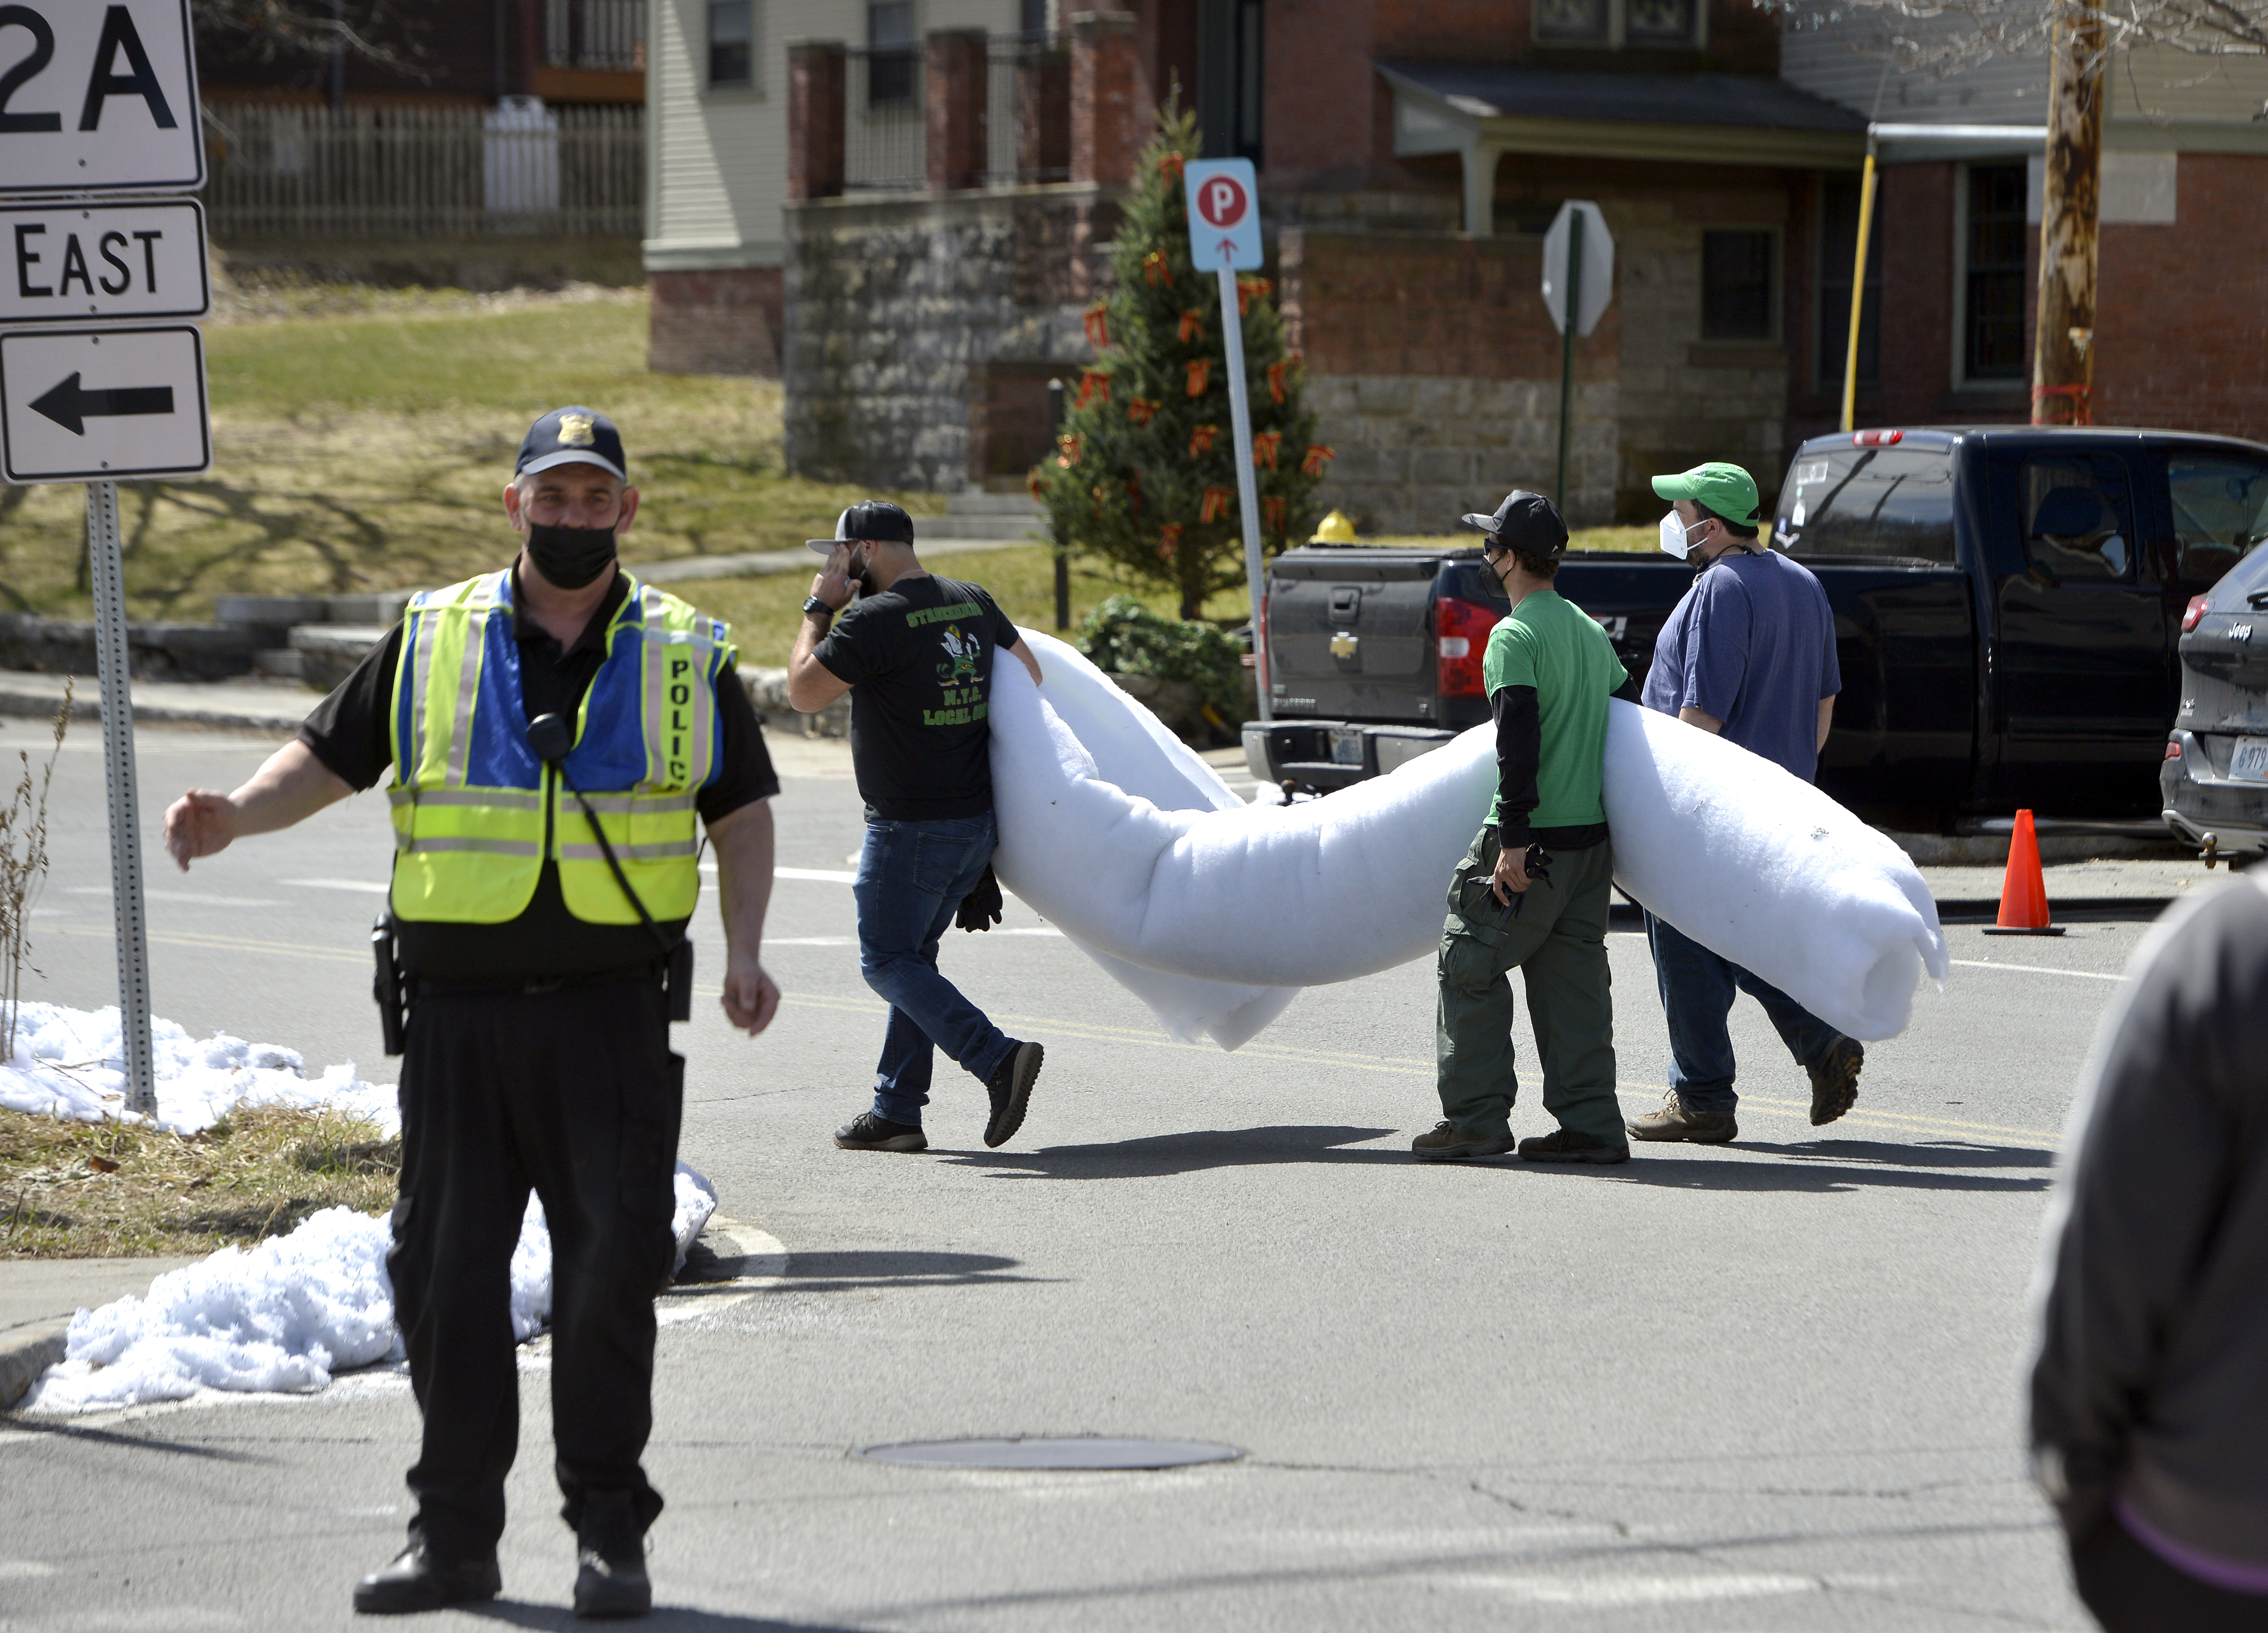 Crew members carry a roll of what will be fake snow across Ashfield Street in Shelburne Falls during the filming of the TV series Dexter, April 7, 2021.   (Don Treeger / The Republican)